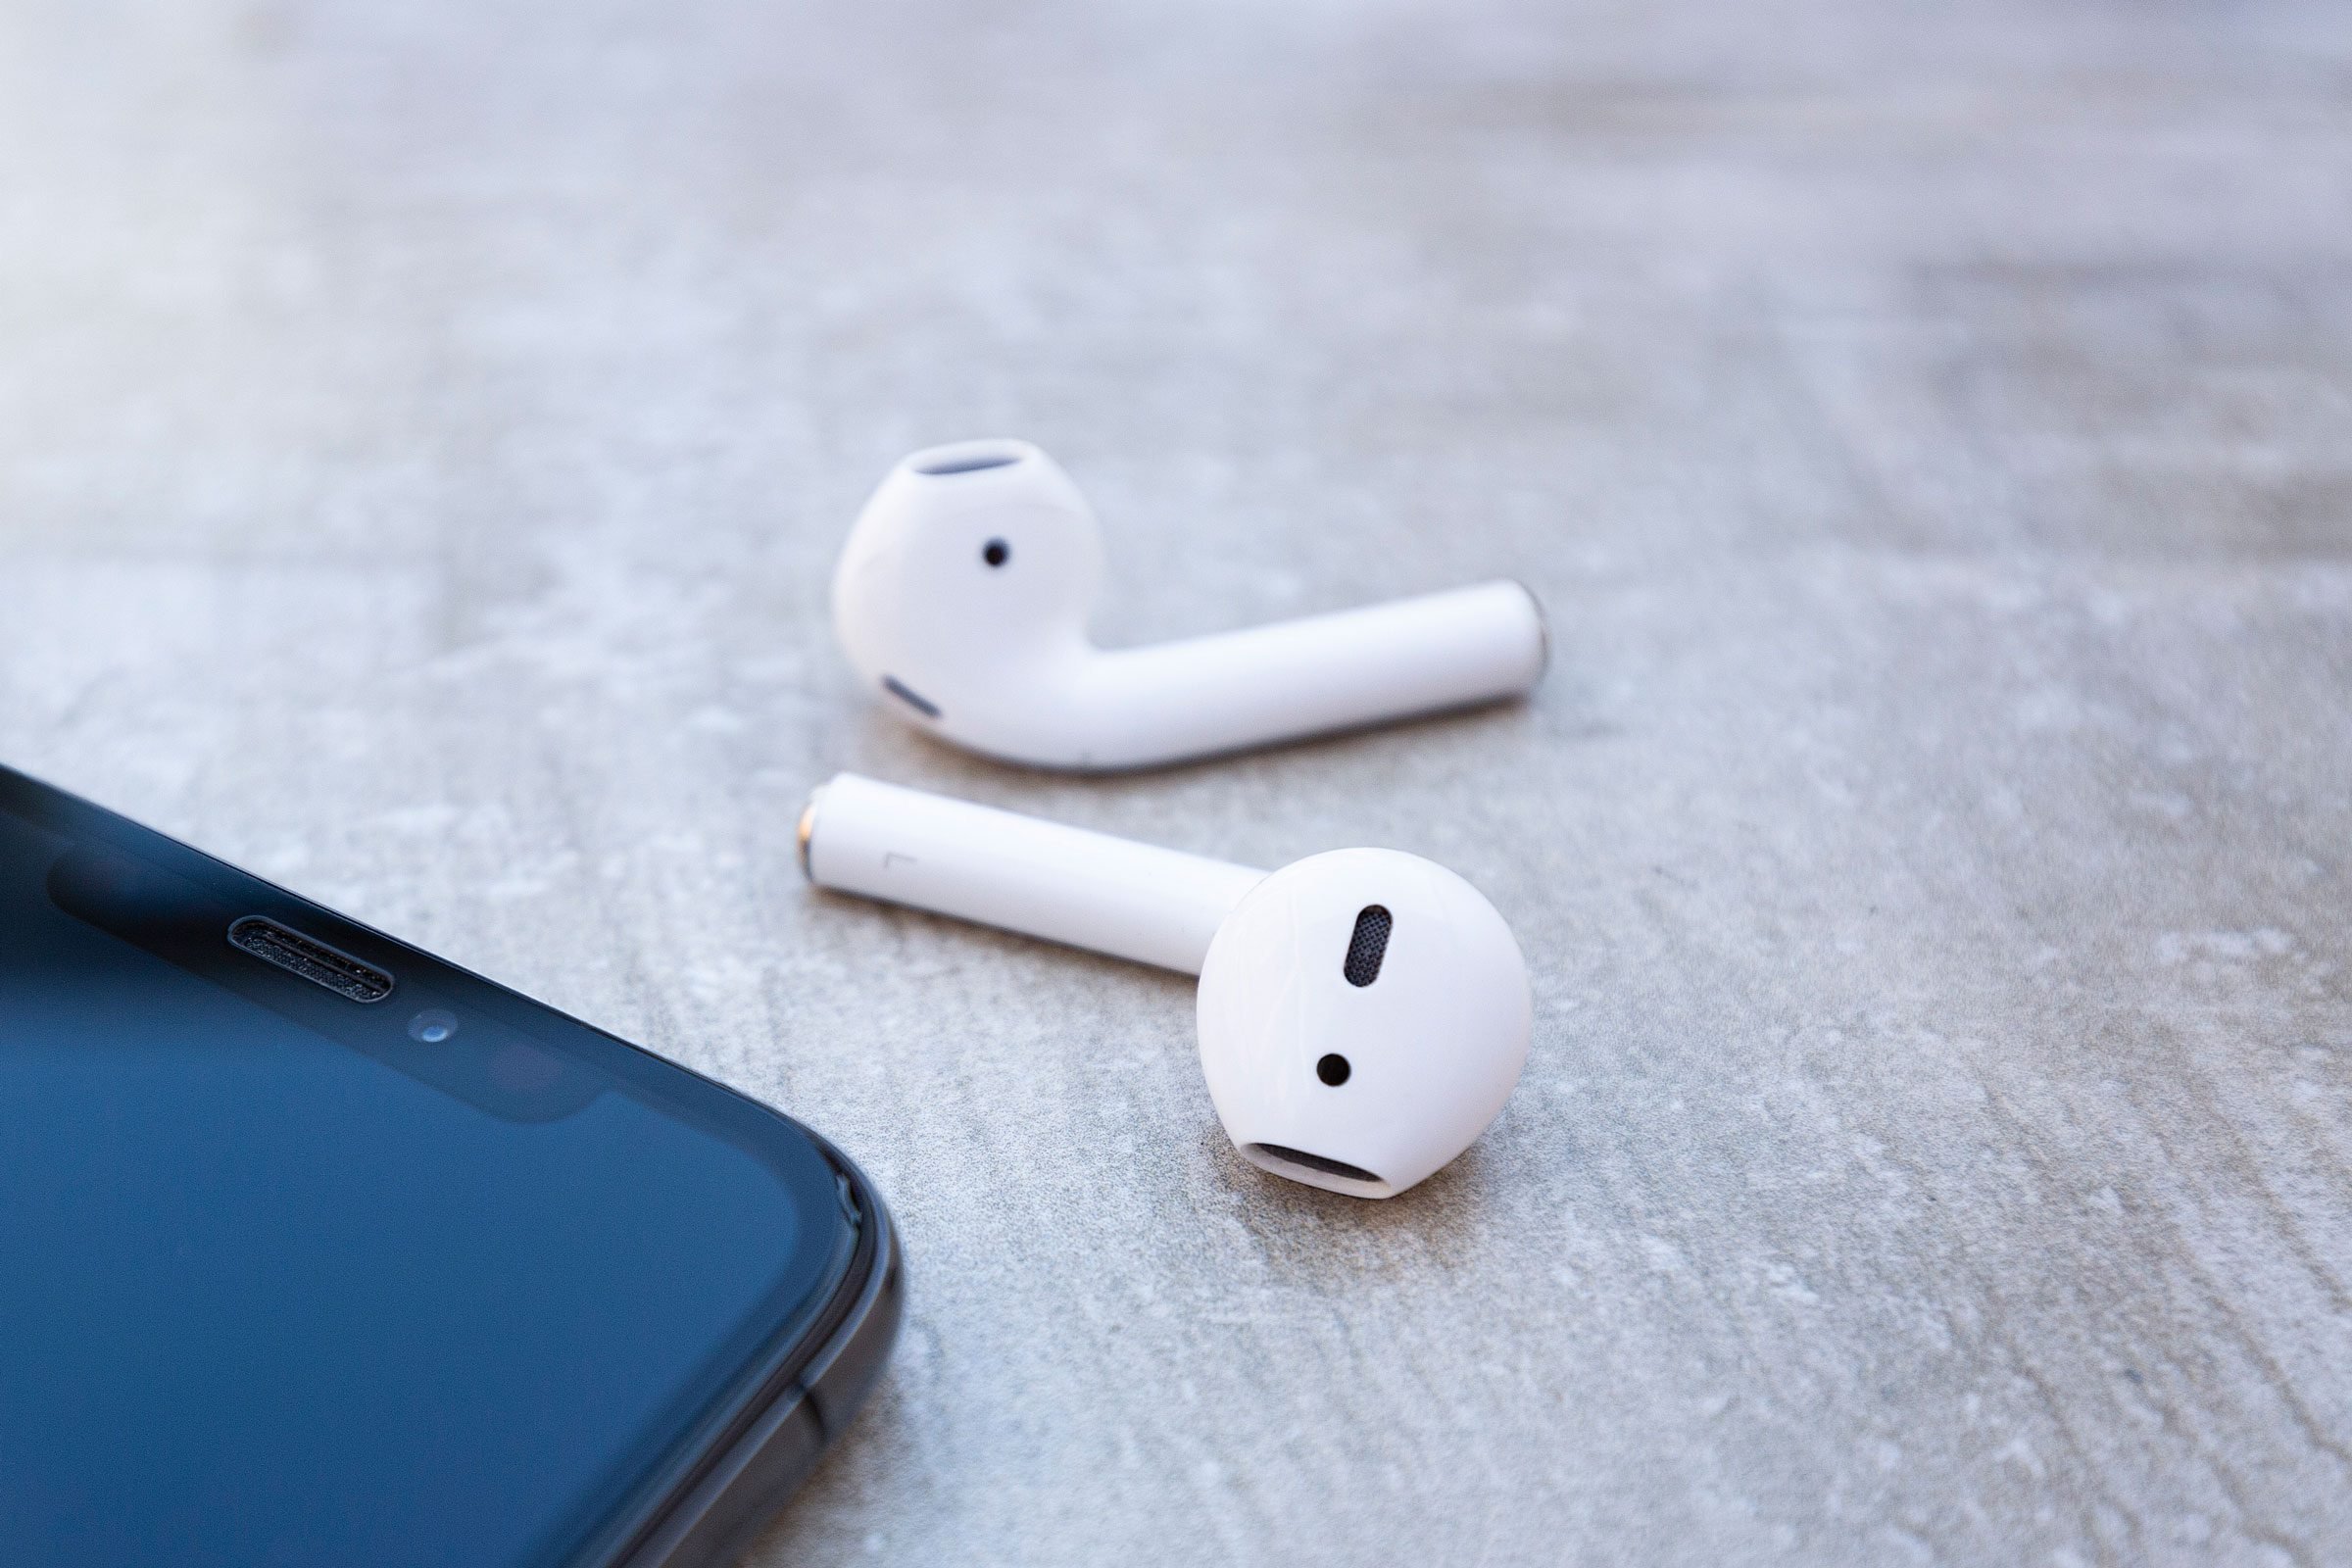 How to Find Lost AirPods, a Editor